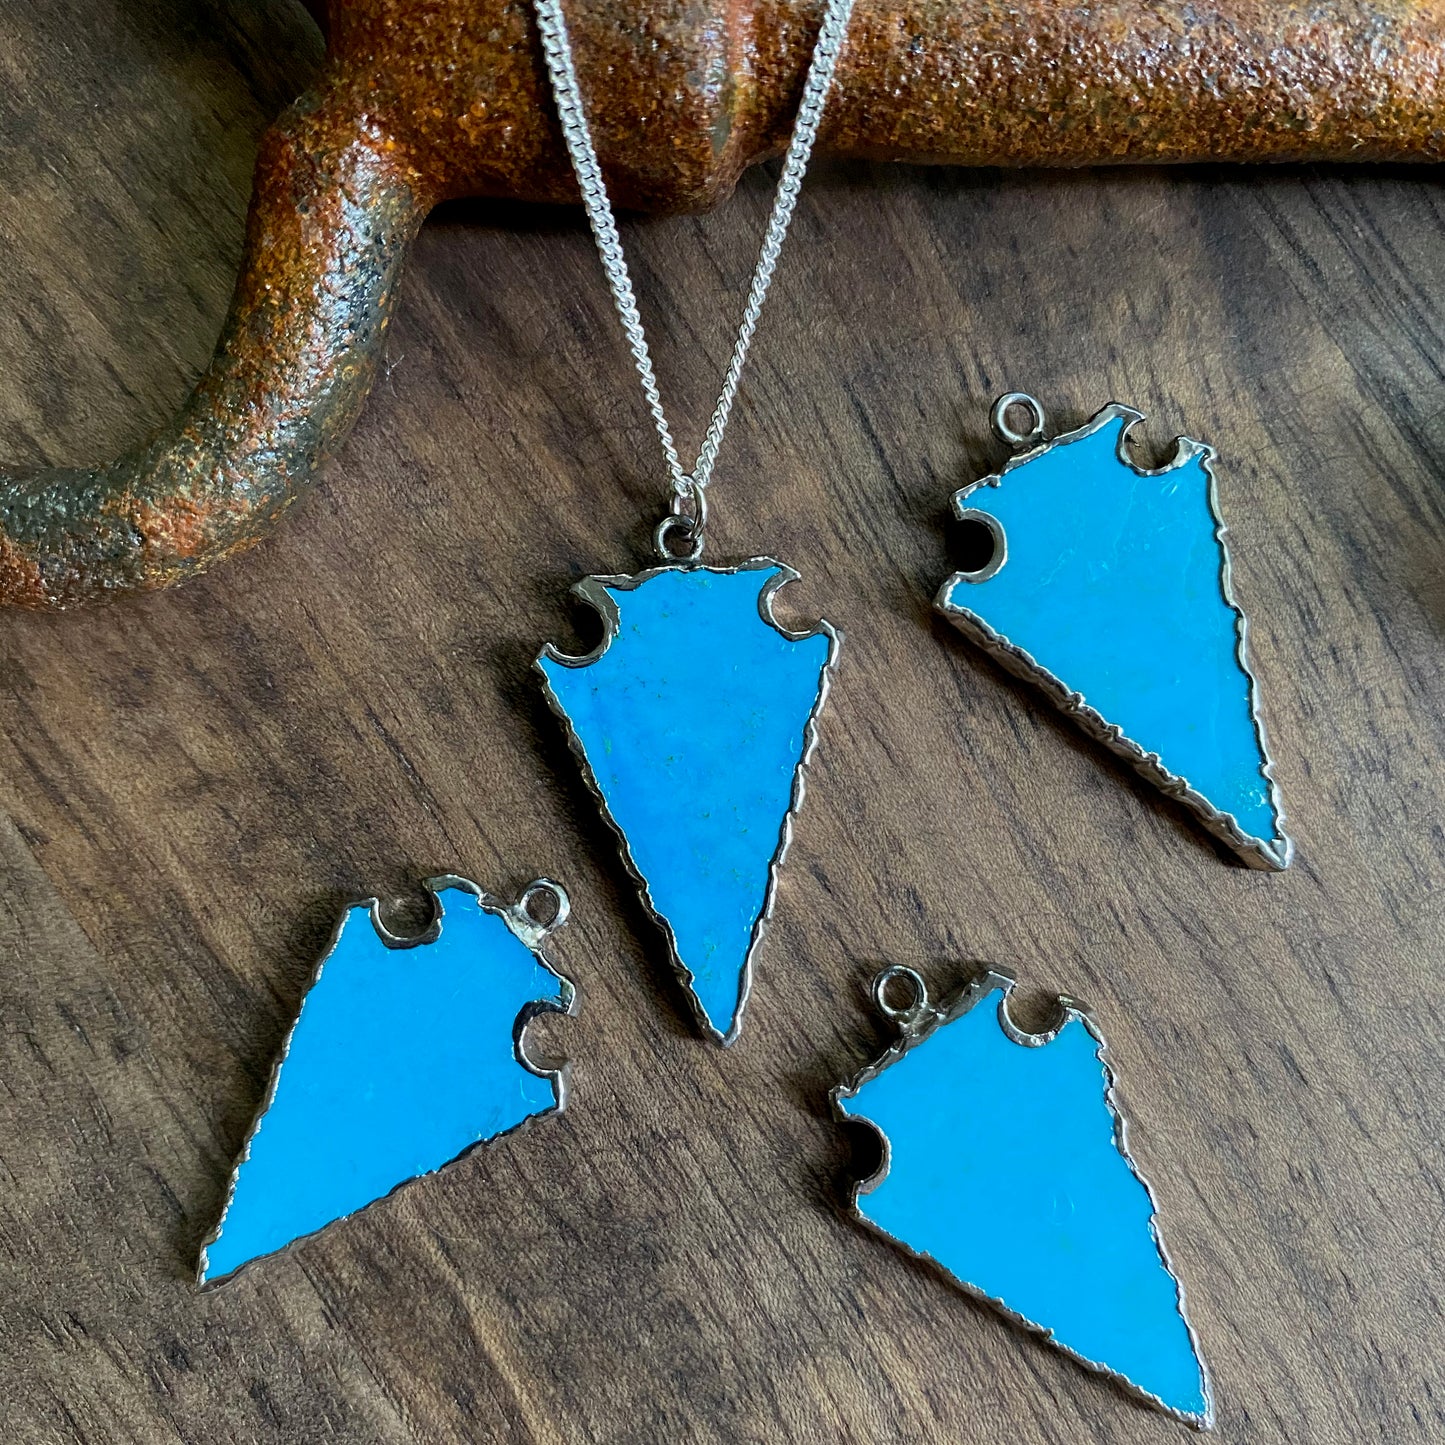 Turquoise Necklace Silver, Arrowhead Necklace,Stone Arrowhead Silver, Blue Stone Necklace,Raw Stone Necklace, Turquoise Pendant Necklace